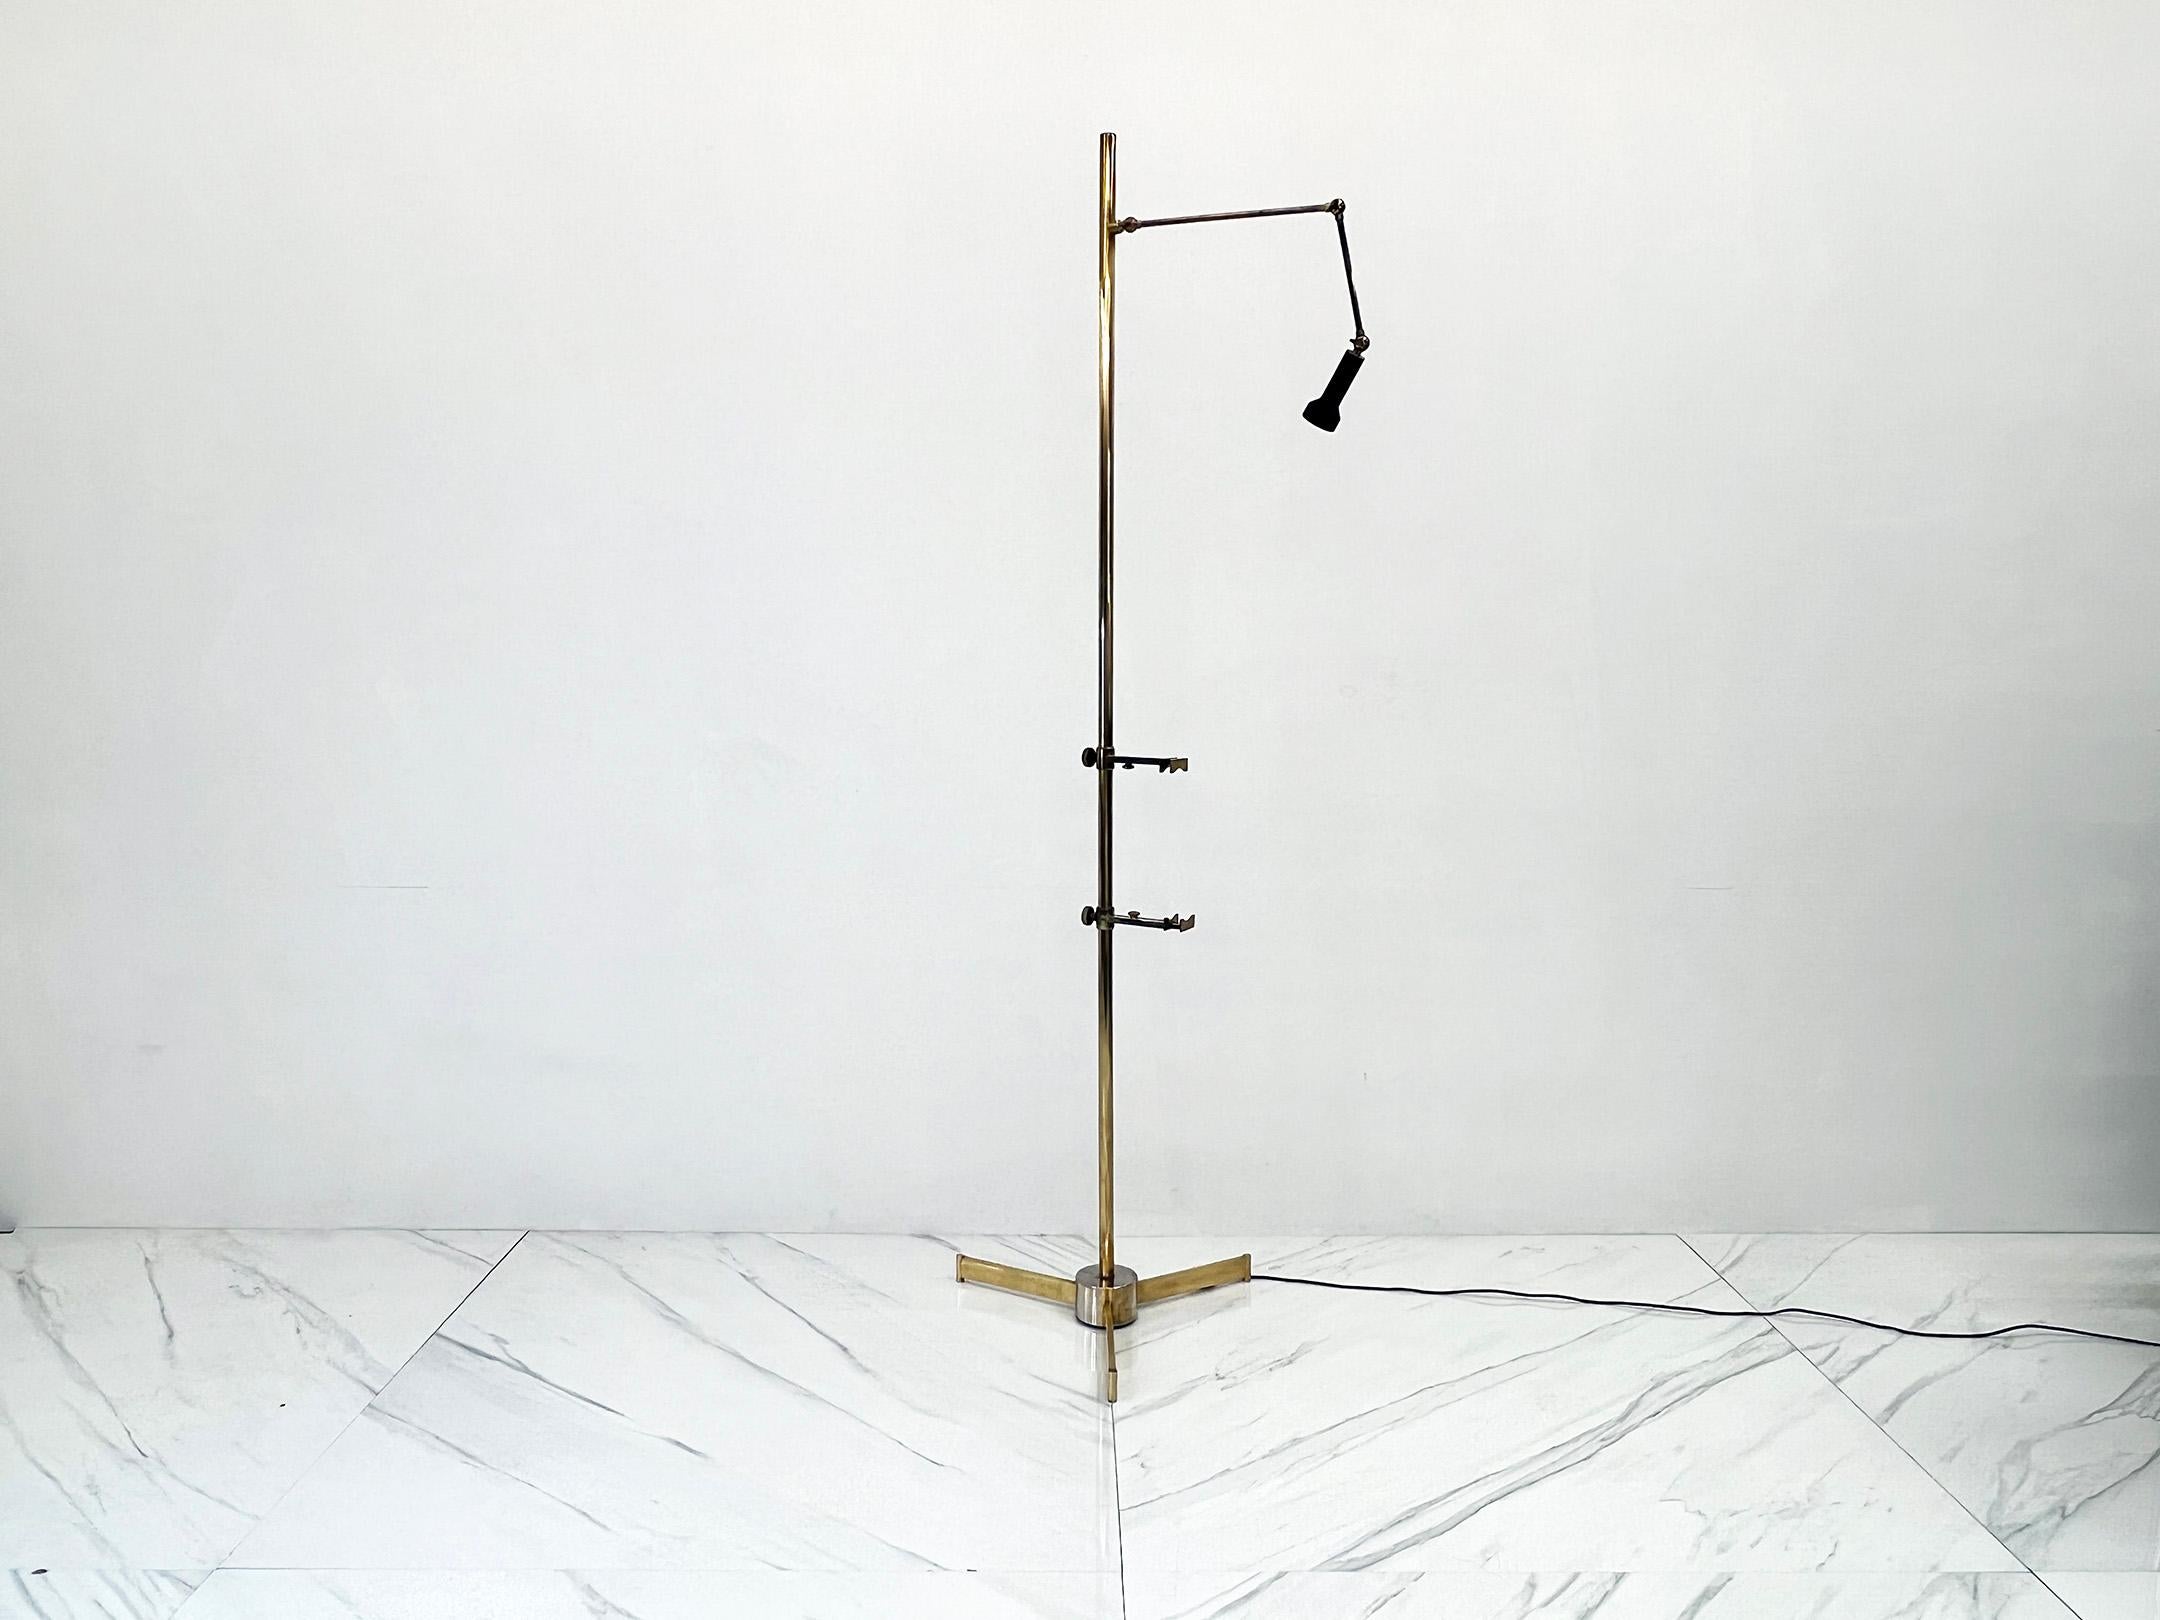 Angelo Lelli's Easel lamp is one of his most notable designs. Introduced in 1952, the Easel lamp was inspired by the form of an artist's easel and was designed to be a functional and adjustable task lamp.

The lamp features a telescoping arm that